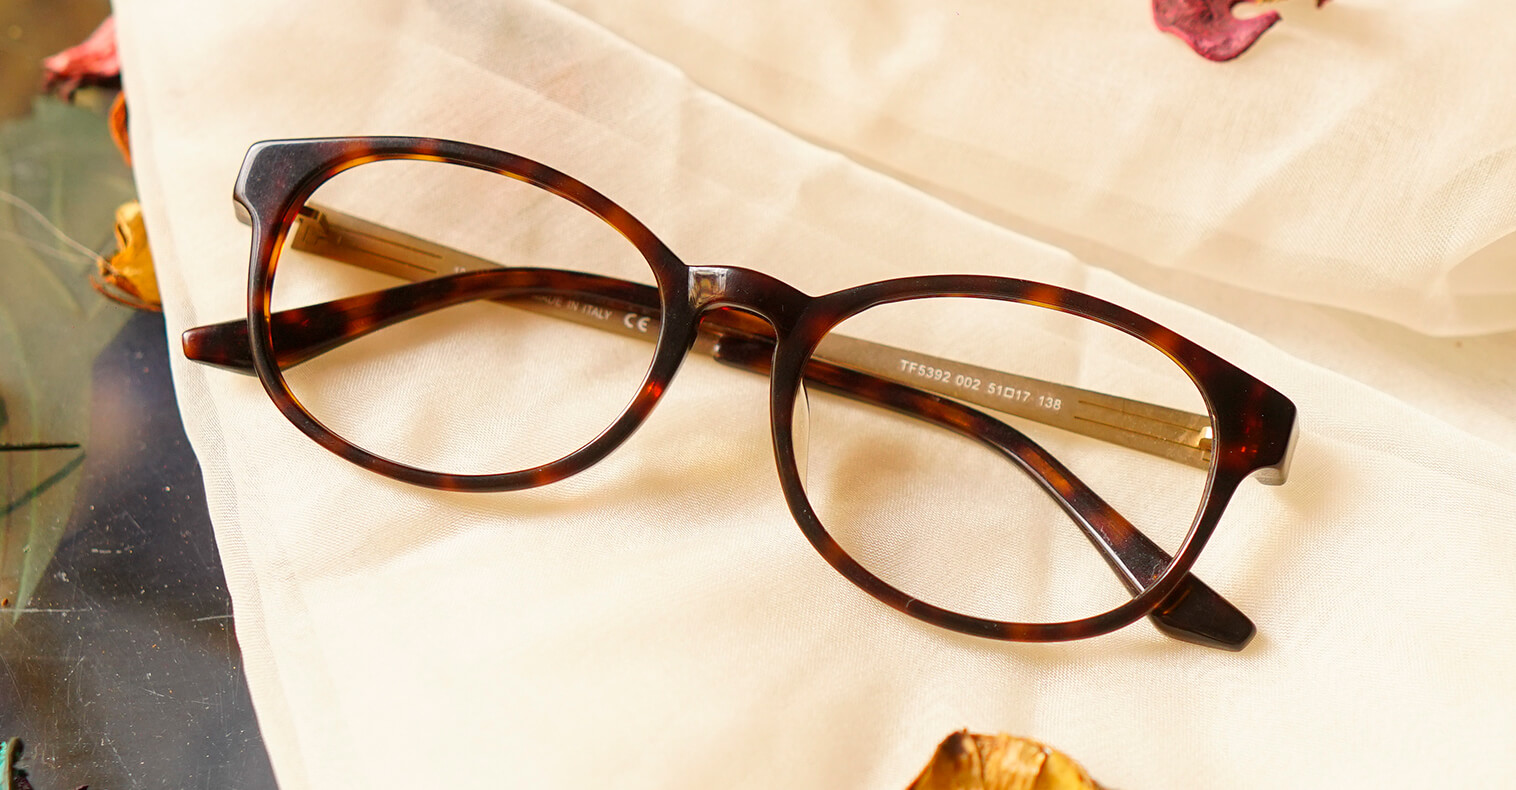 Tomford Chocopie troties brown colored full frame round shape Glasses placed on the table